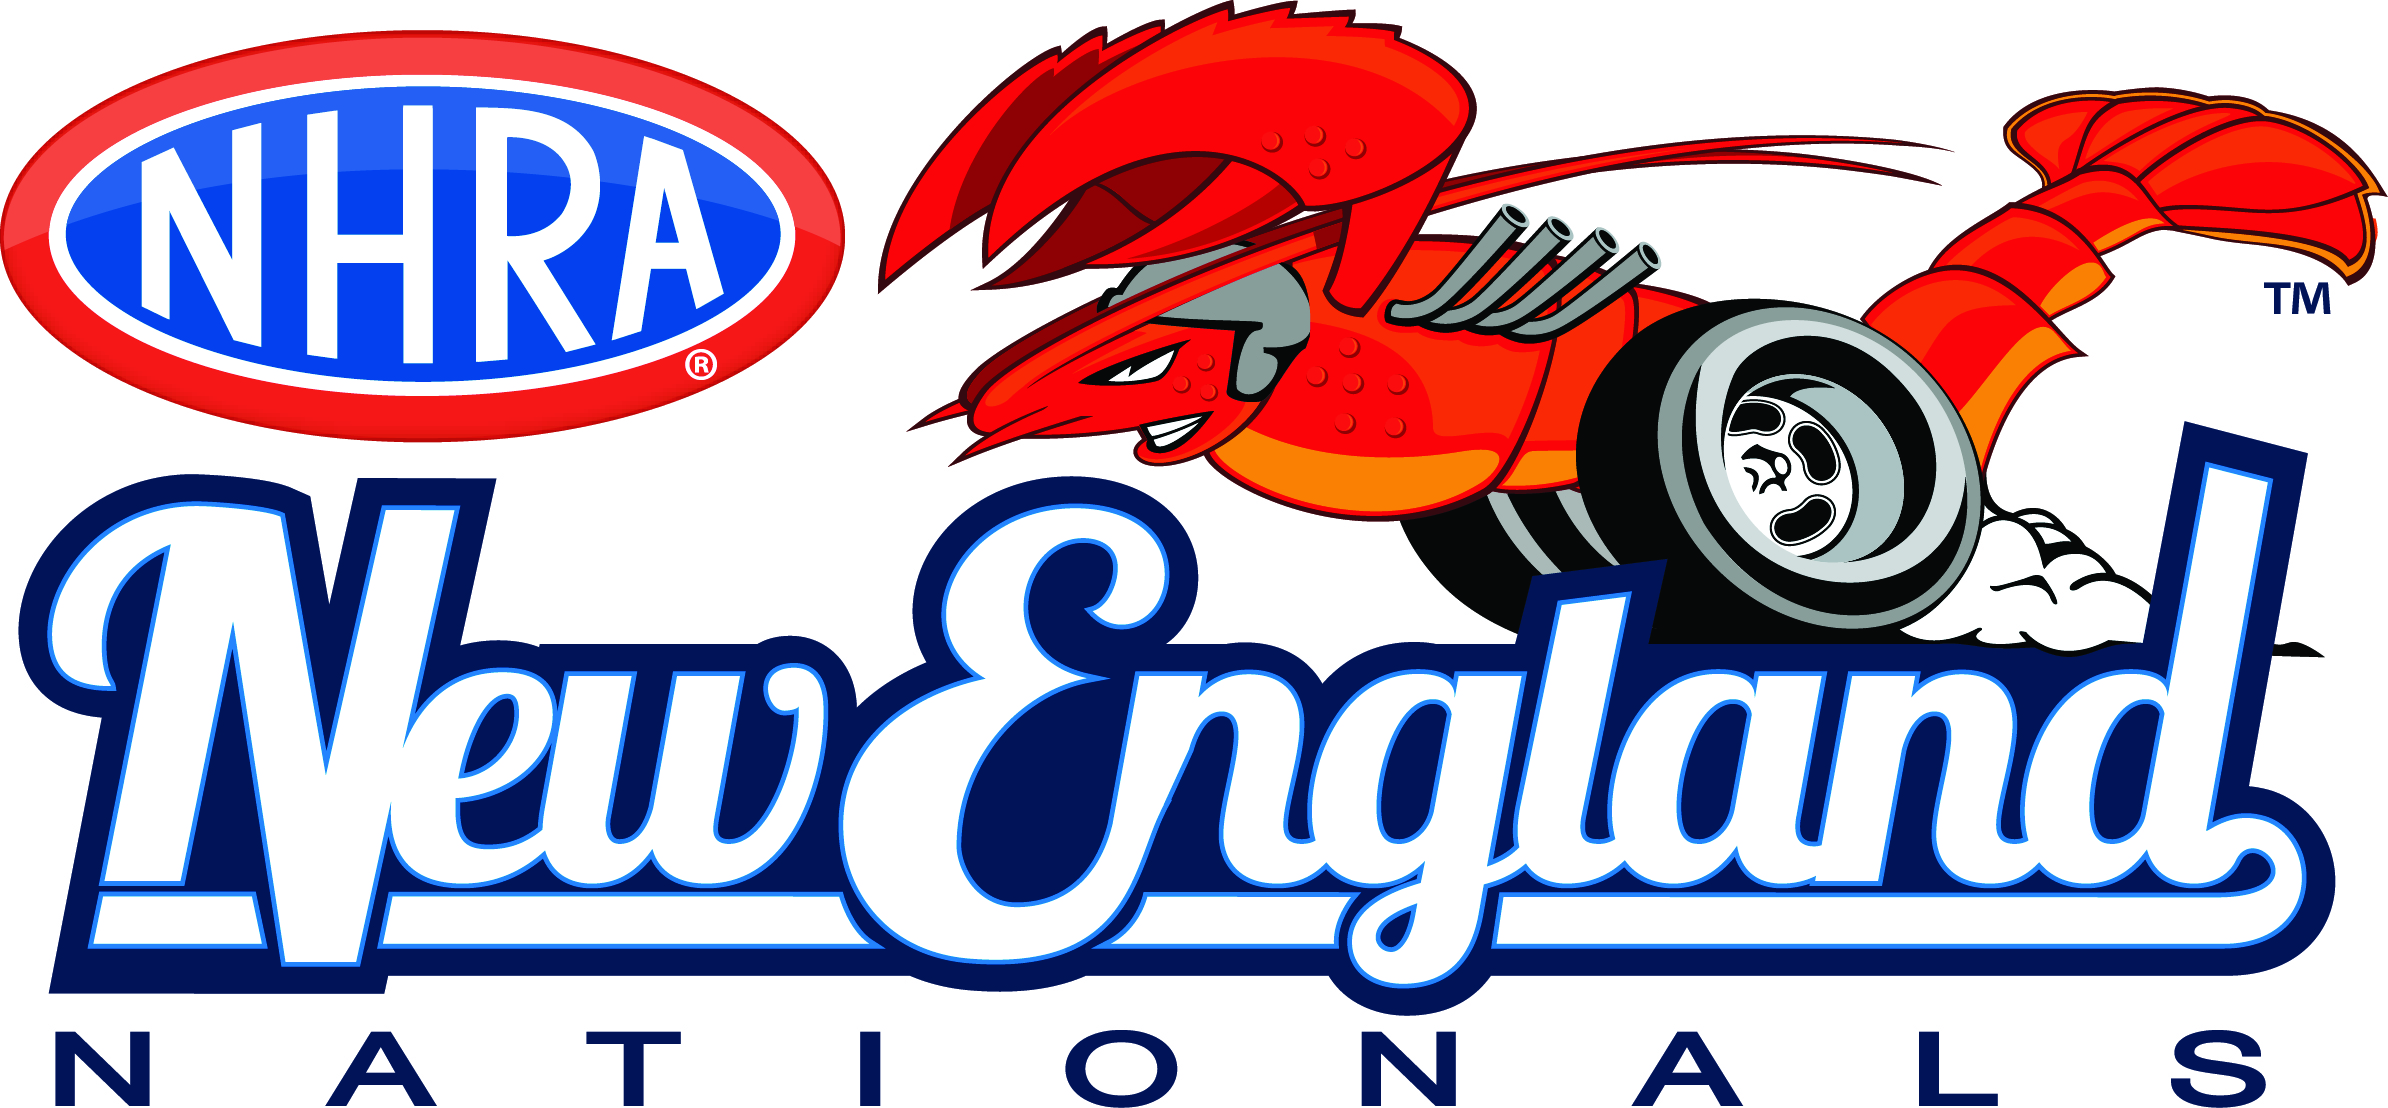 2021 NHRA NEW ENGLAND NATIONALS EVENT RESULTS Competition Plus